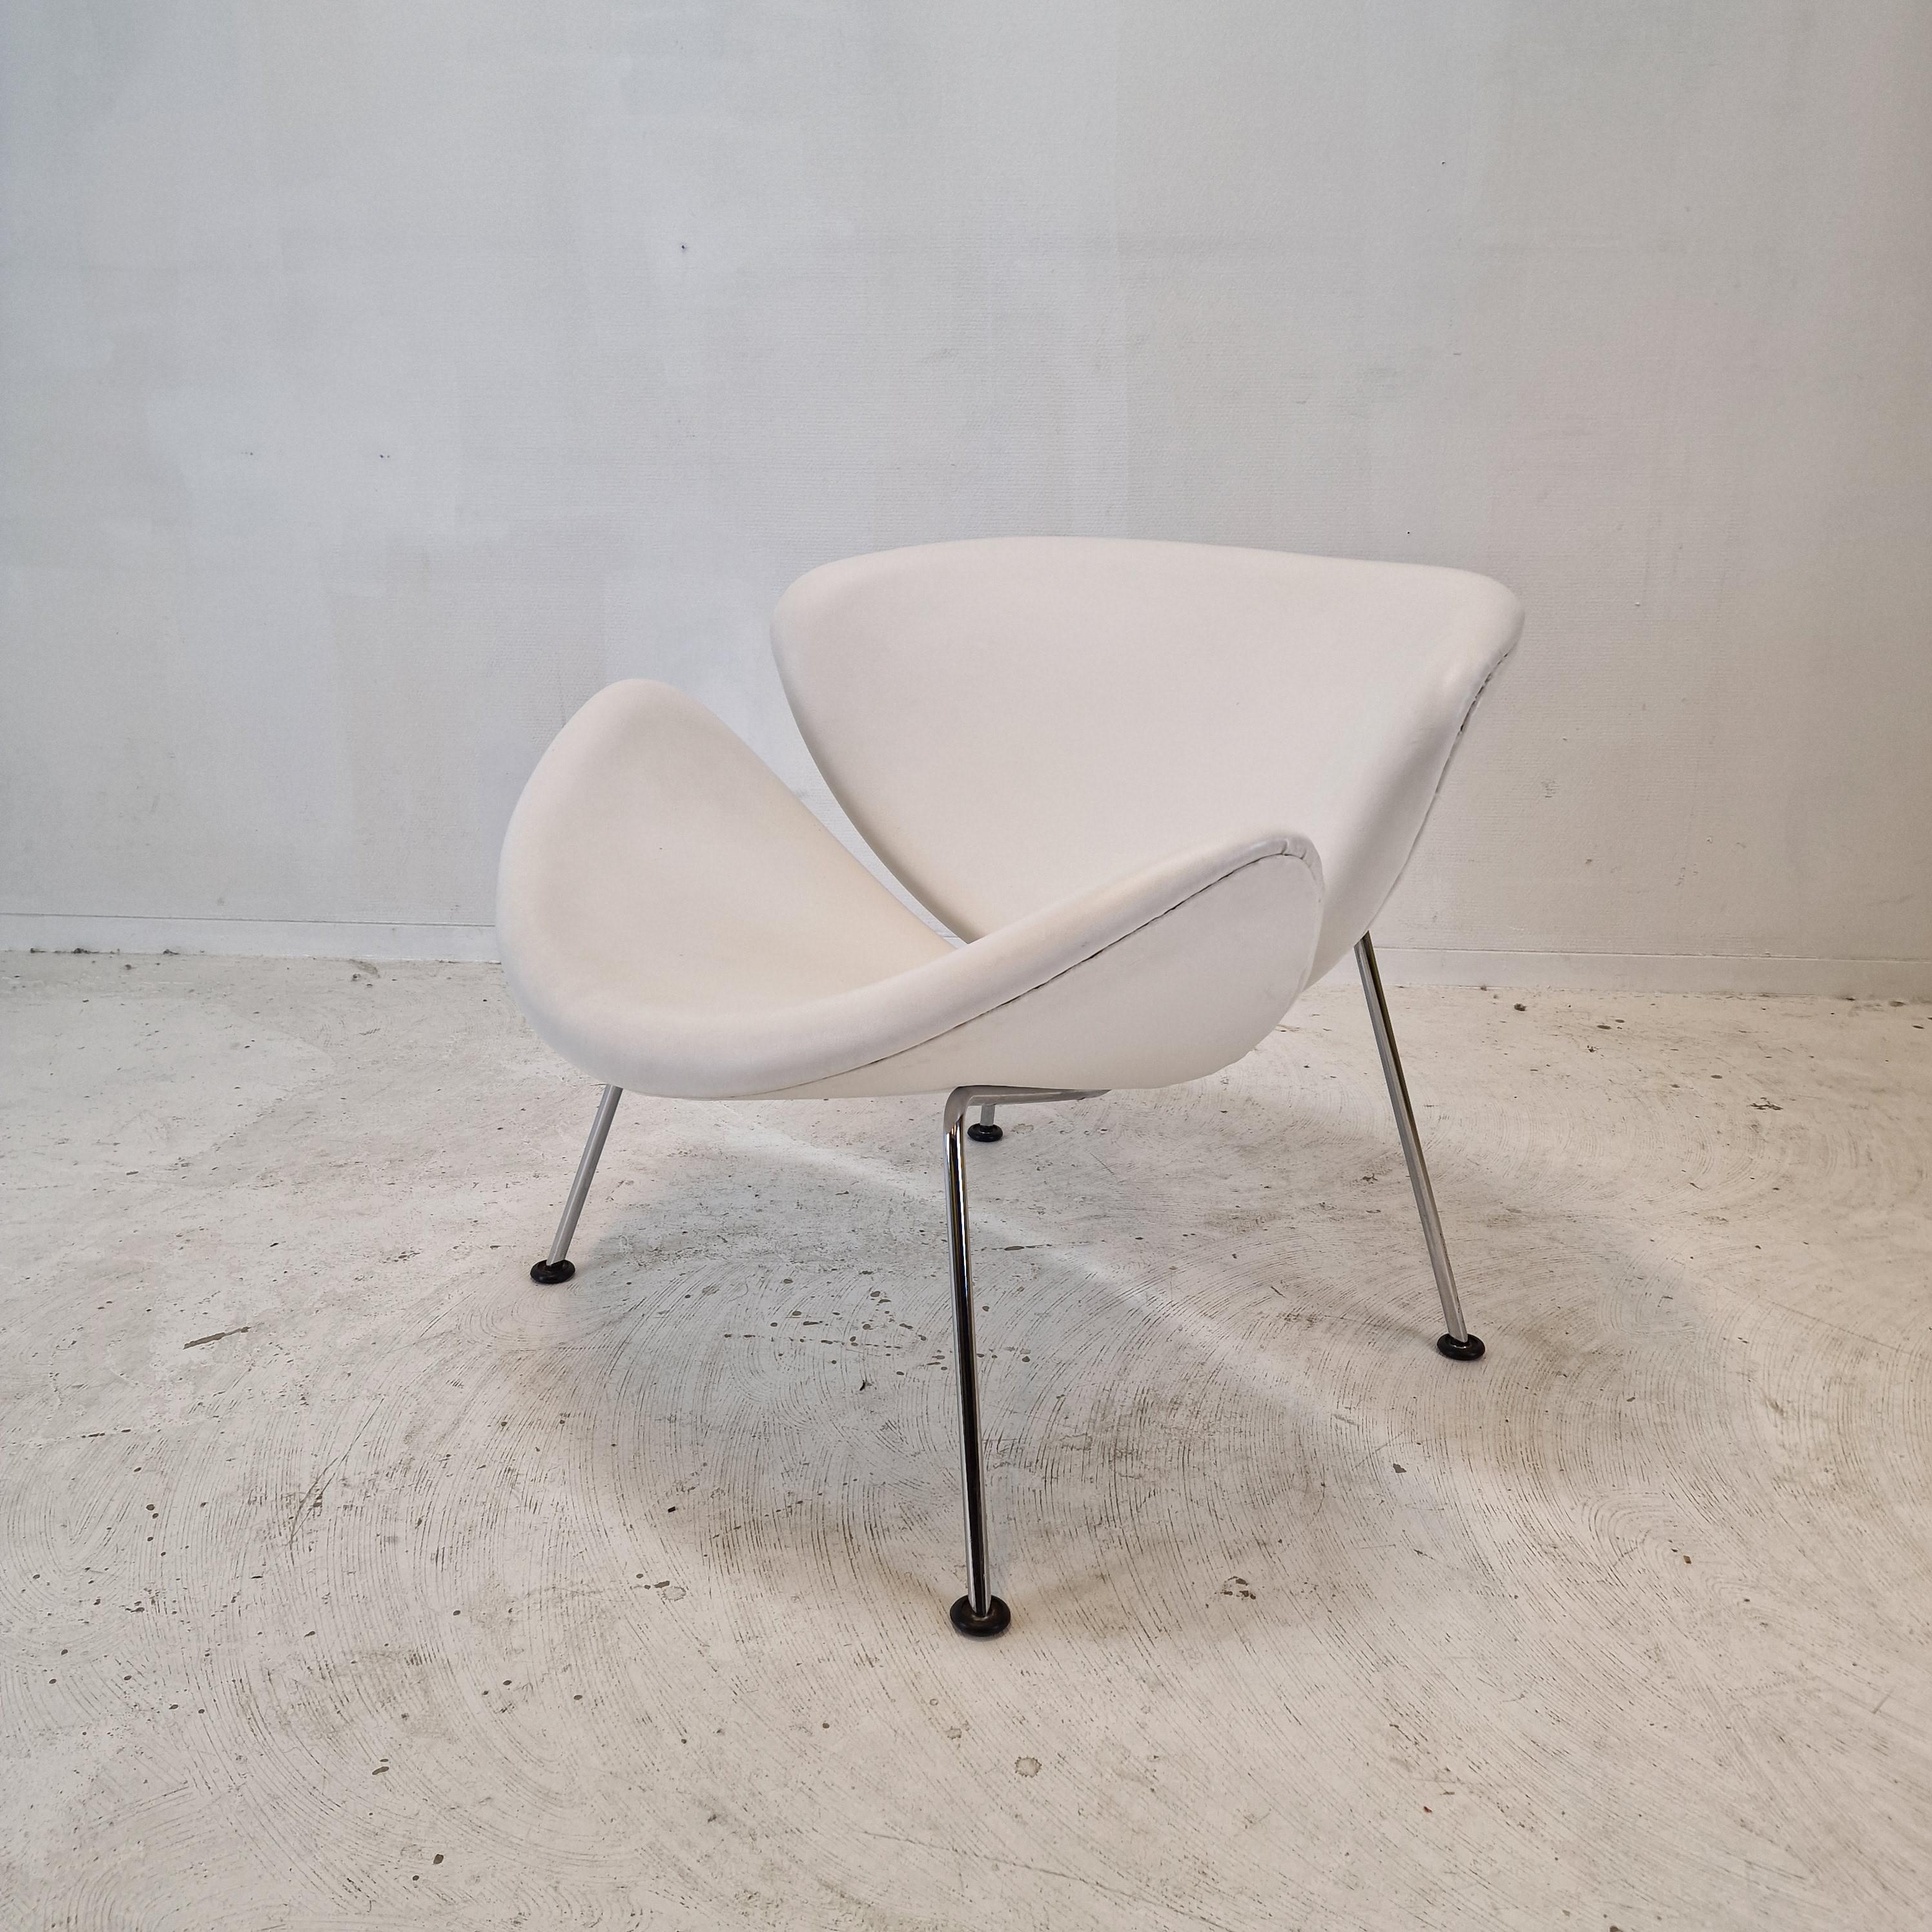 The famous Artifort orange slice chair by Pierre Paulin, designed in the 60s.
This original chair with chromed legs is produced in the 80s.

It is a cute and very comfortable chair.

It has been upholstered some years ago with high quality white